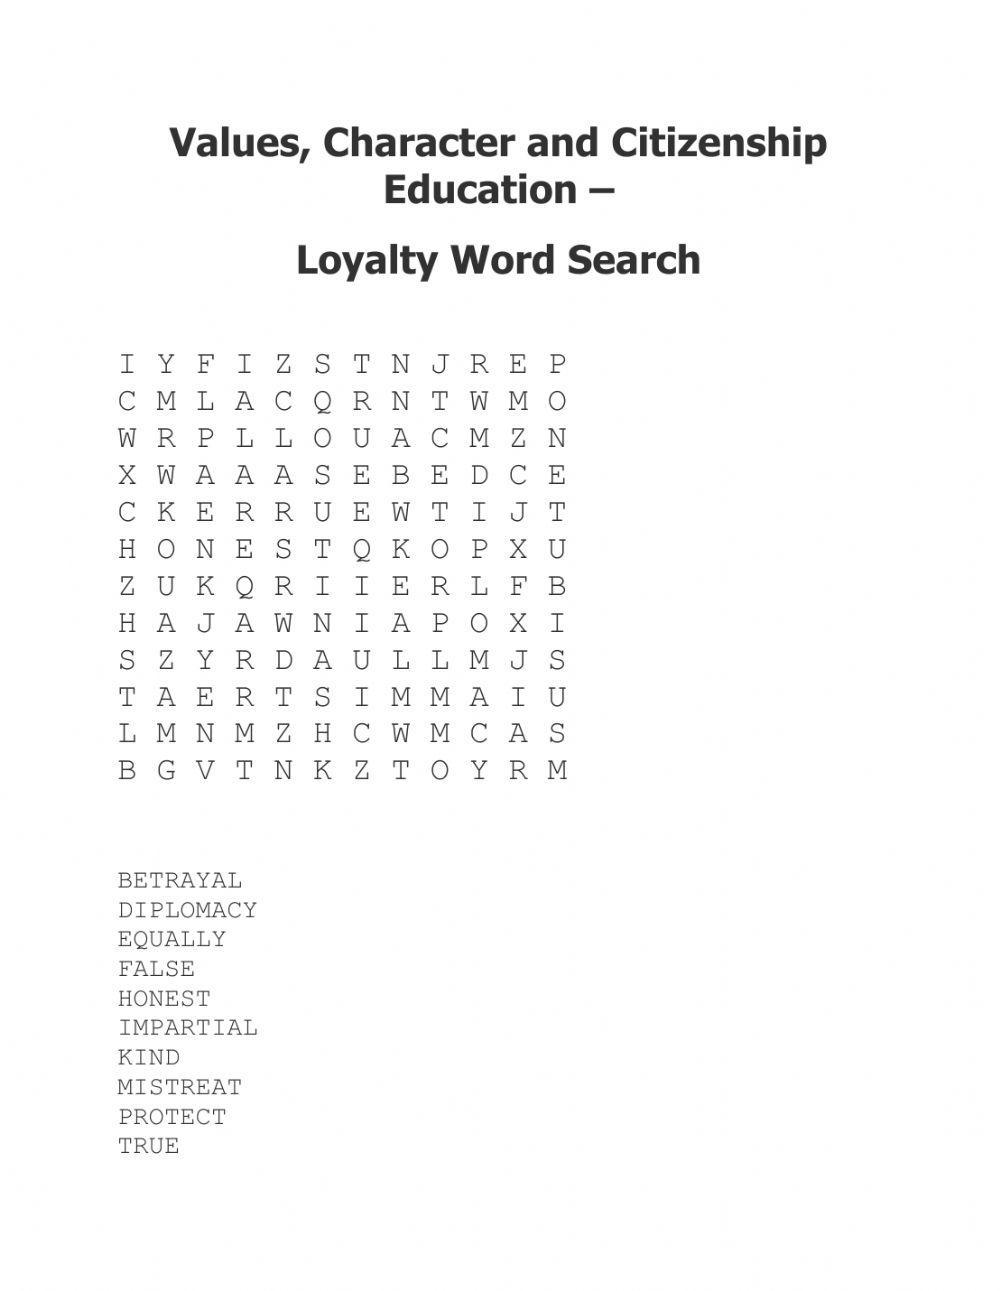 Loyalty Word Search